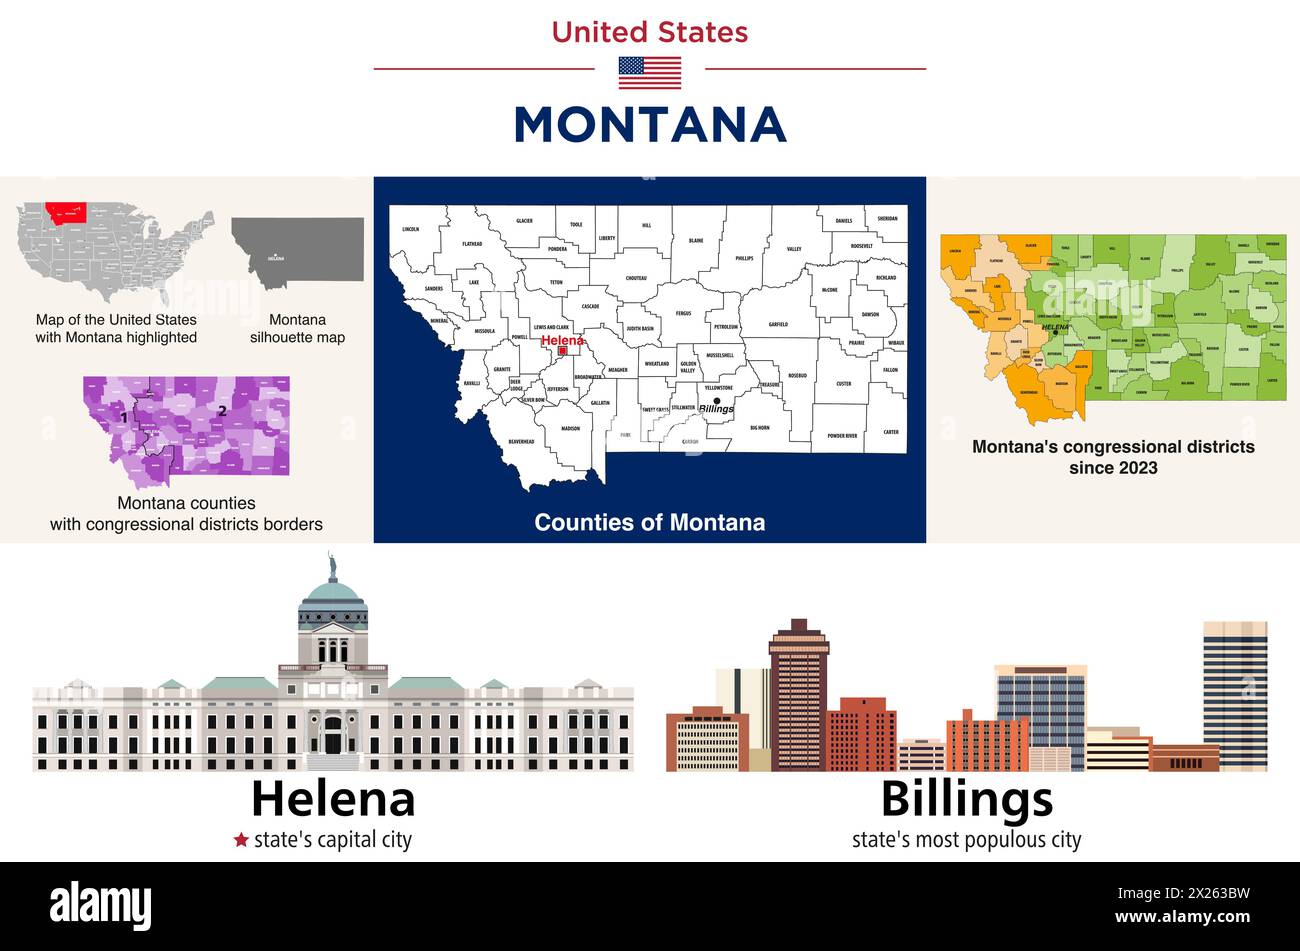 Montana counties map and congressional districts since 2023 map. Helena (state's capital city) and Billings (state's most populous city) skylines. Vec Stock Vector